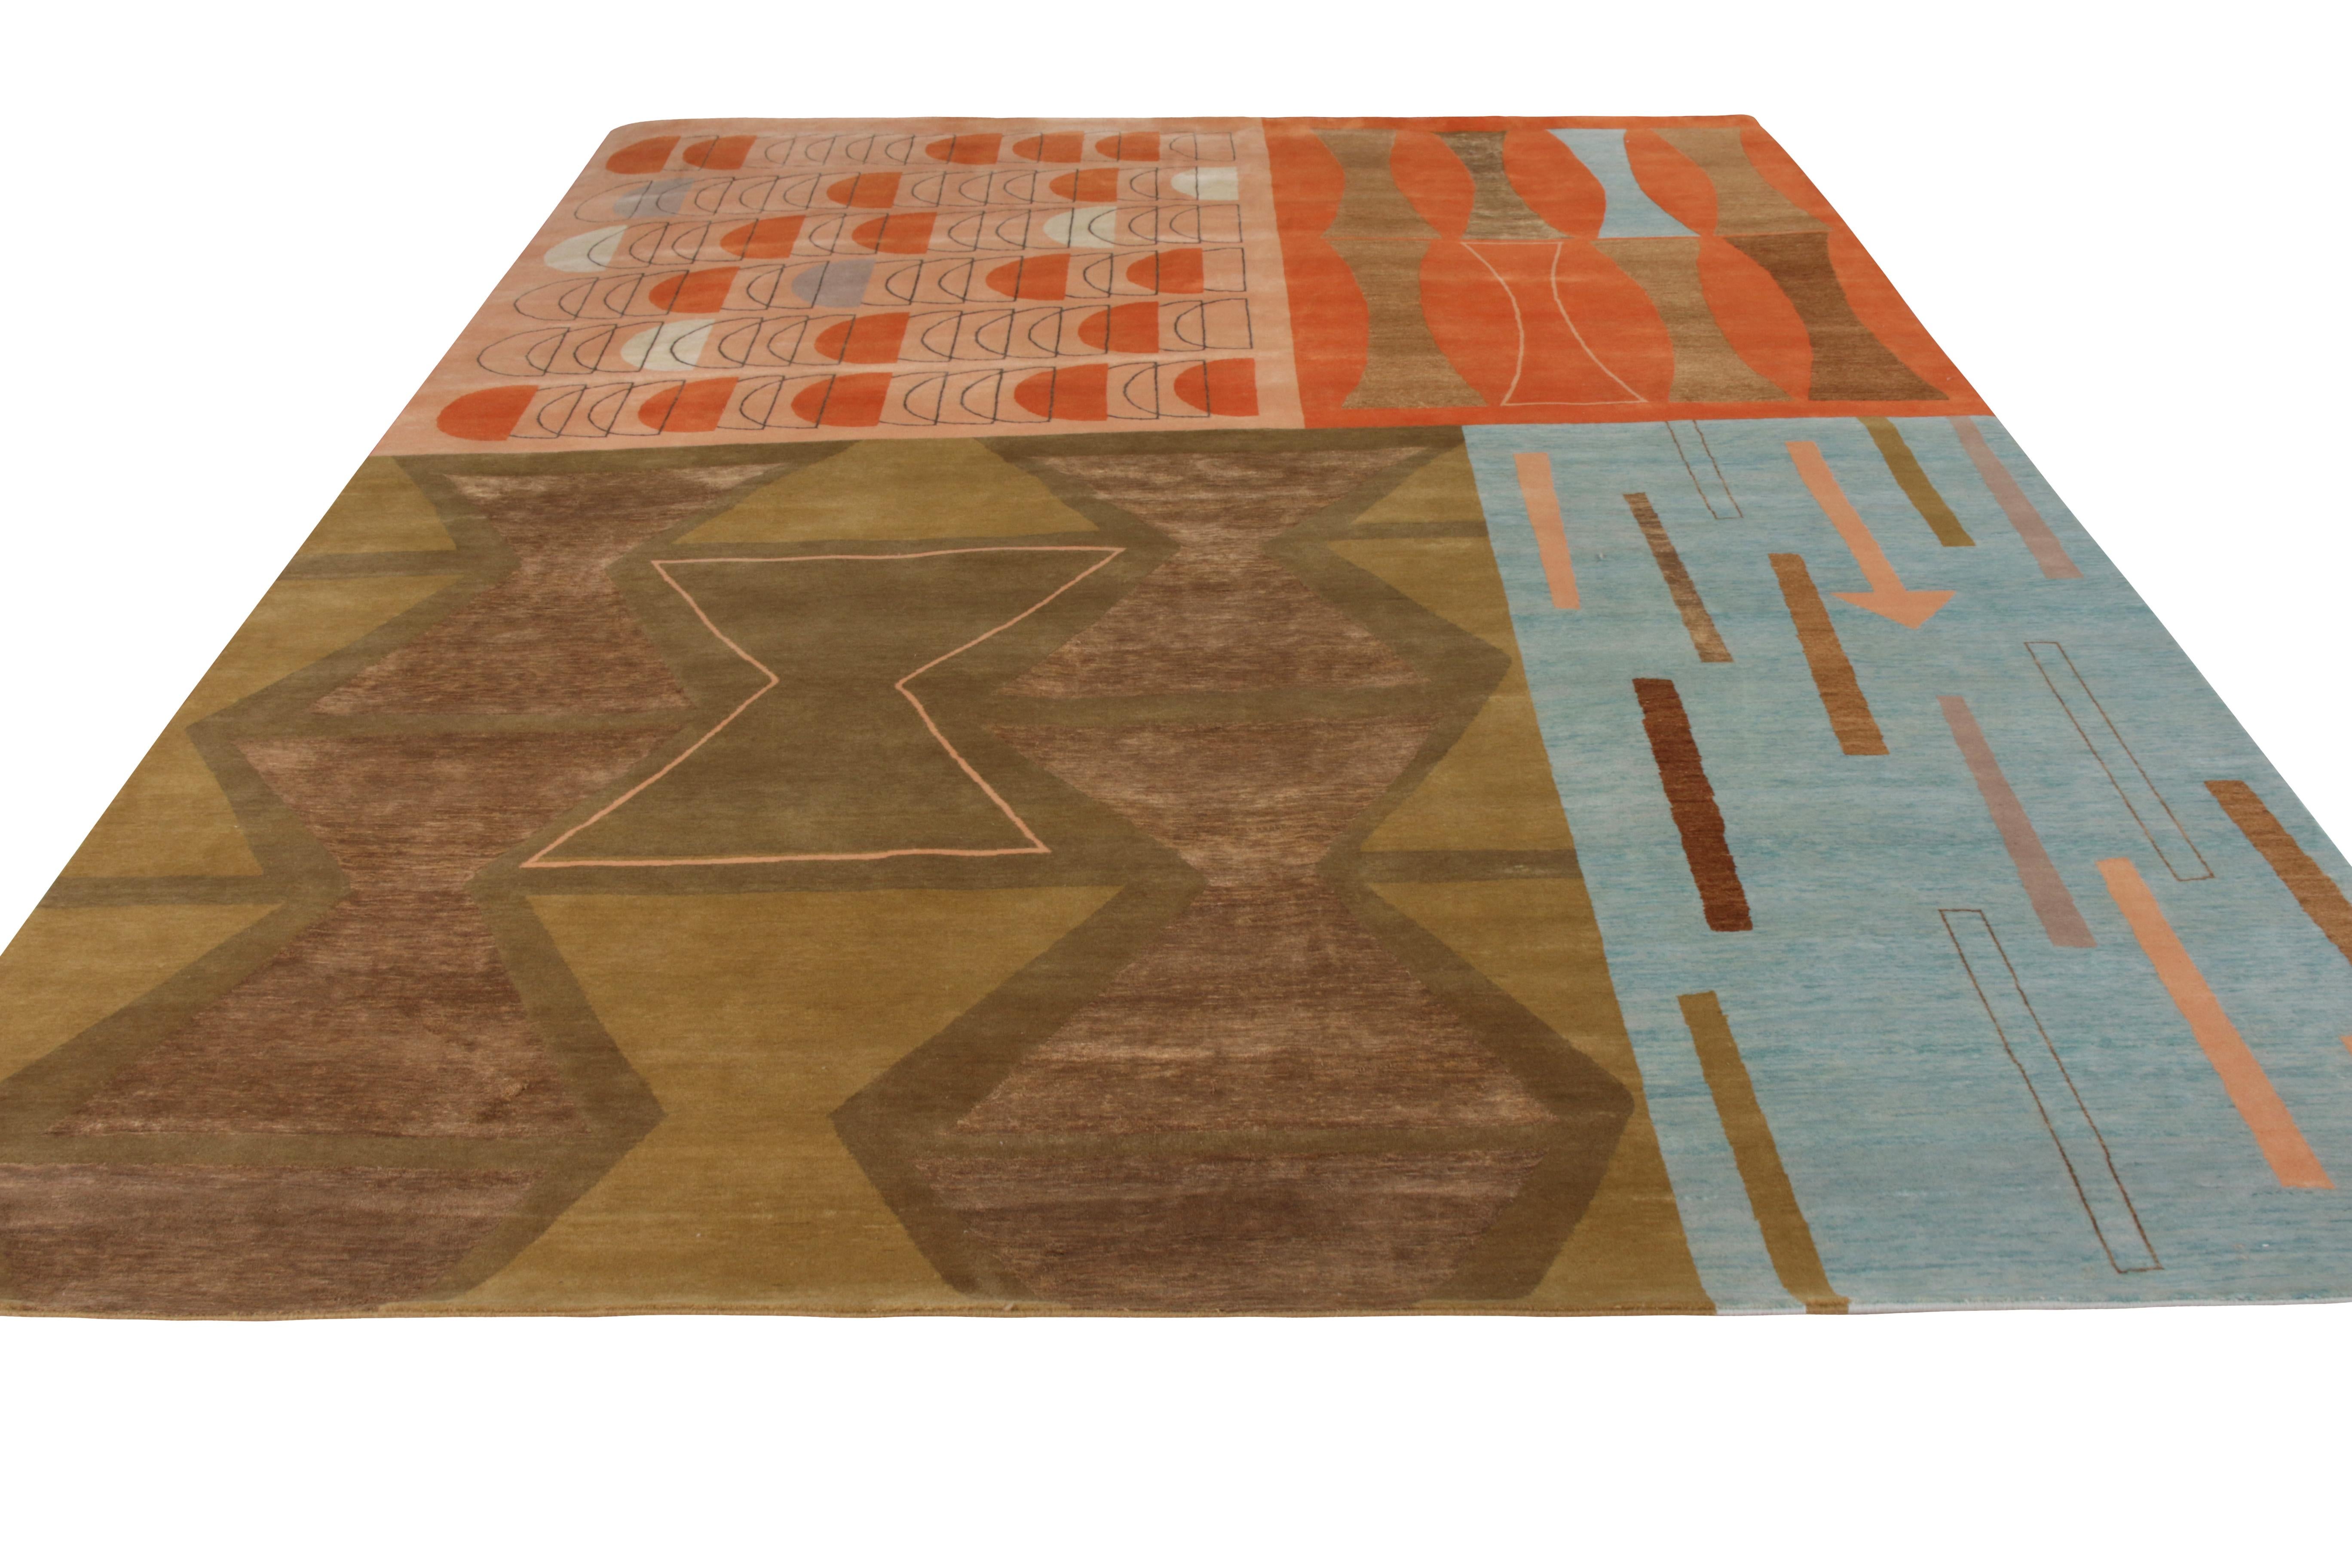 A 9 x 12 rug from Rug & Kilim’s Mid-Century Modern Collection, hand knotted in a unique wool and silk blend. A bold rug design in collaboration with modern artist Jenn Ski, exploring varied atomic age styles in this distinction.

On the design: